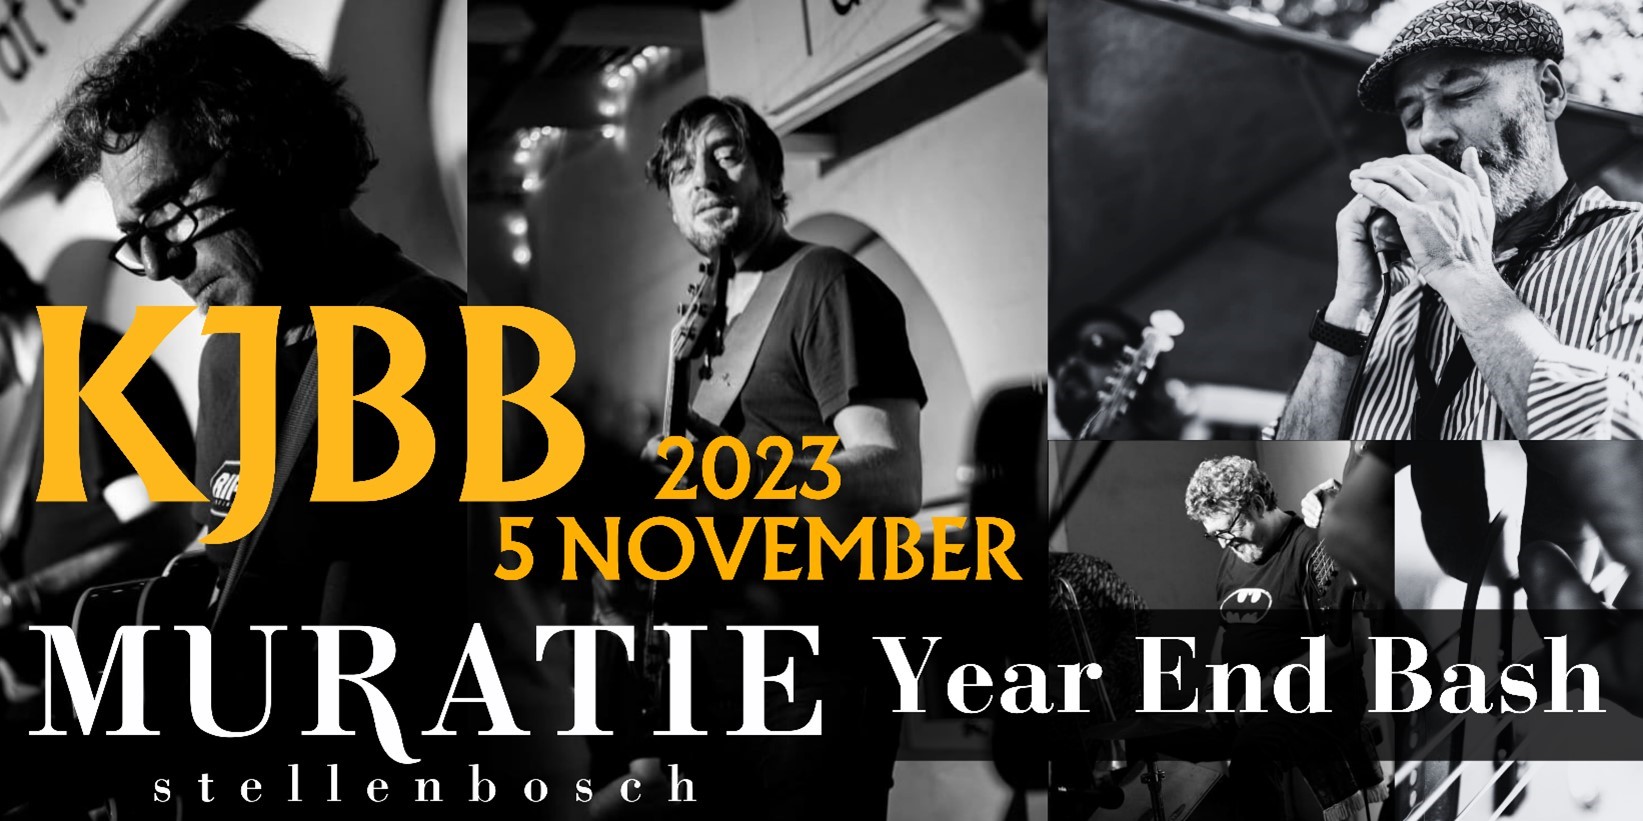 You are currently viewing DON’T MISS MURATIE’S 2023 YEAR END BASH WITH THE KITCHEN JAMMIN’ BLUES BAND